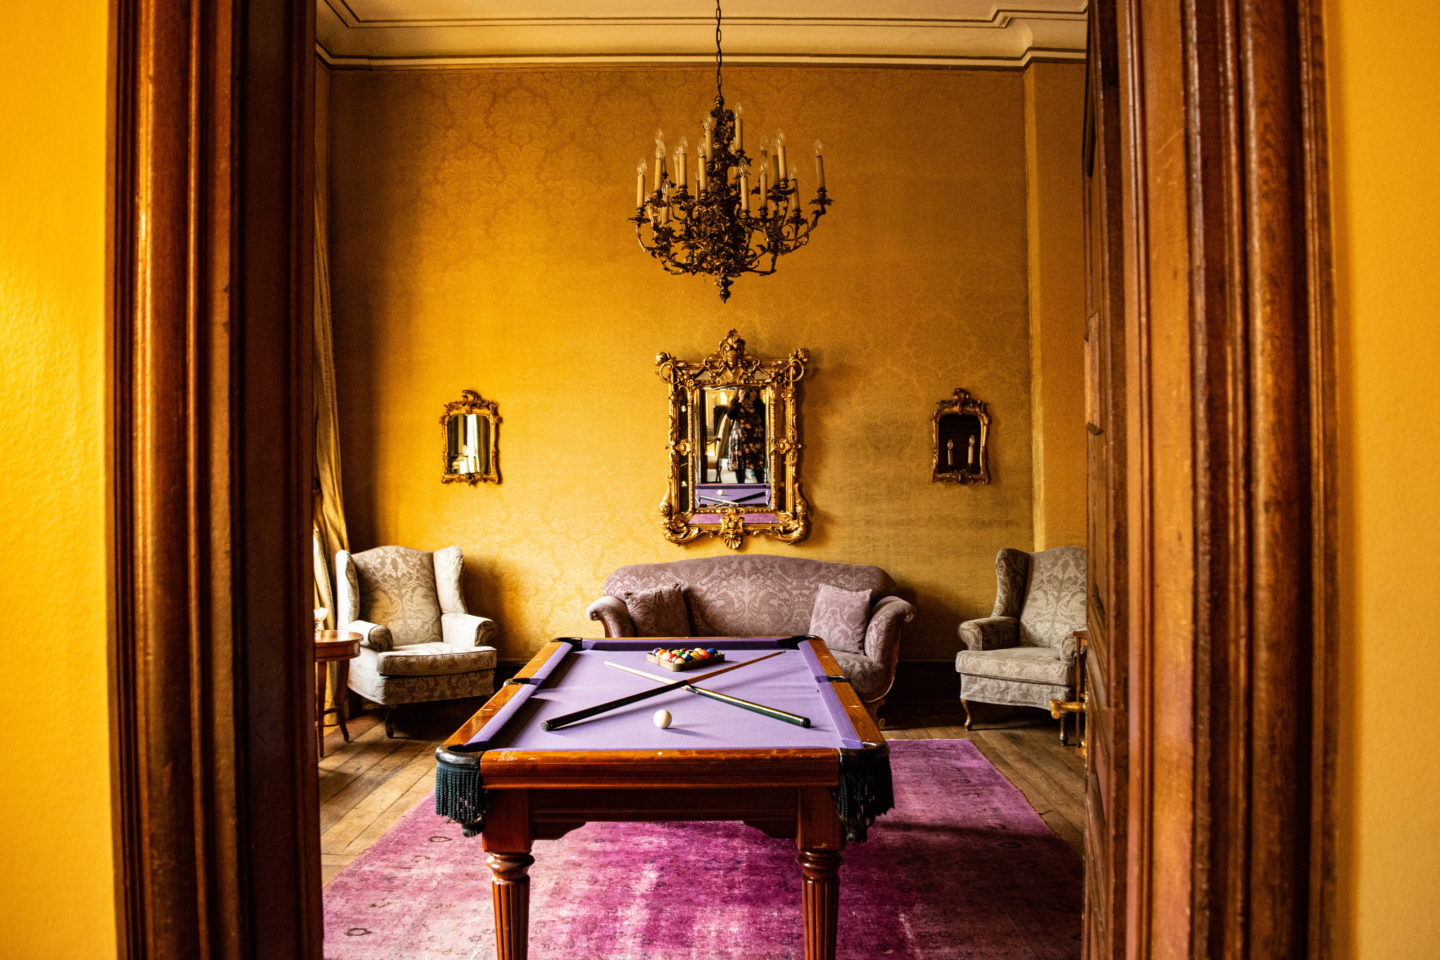 Billiards room at the hotel